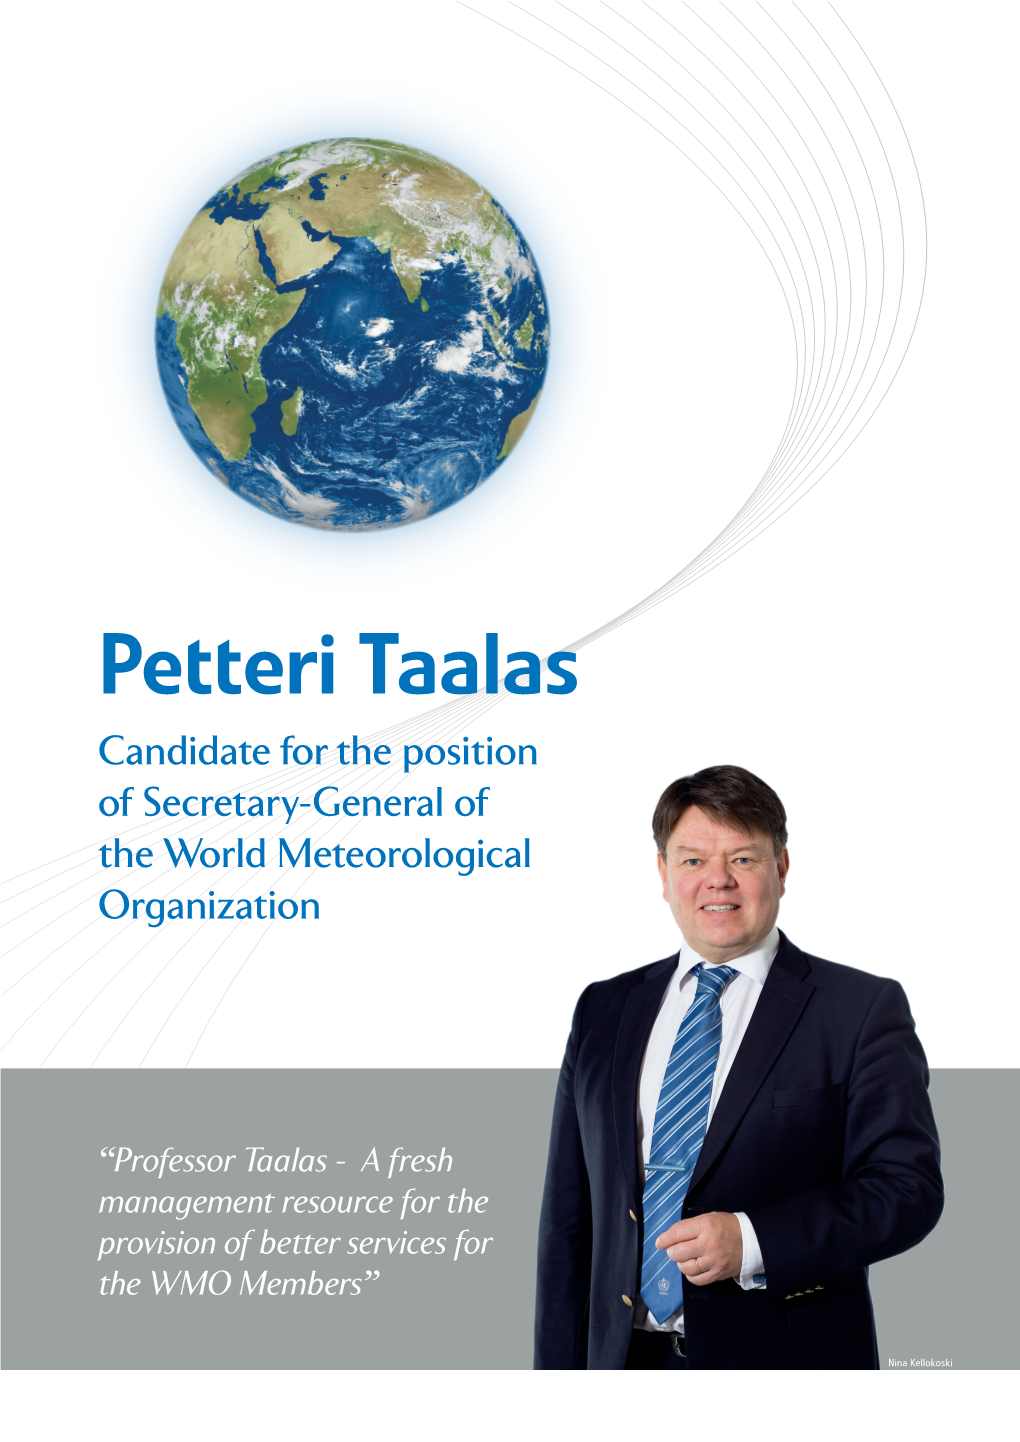 Petteri Taalas Candidate for the Position of Secretary-General of the World Meteorological Organization